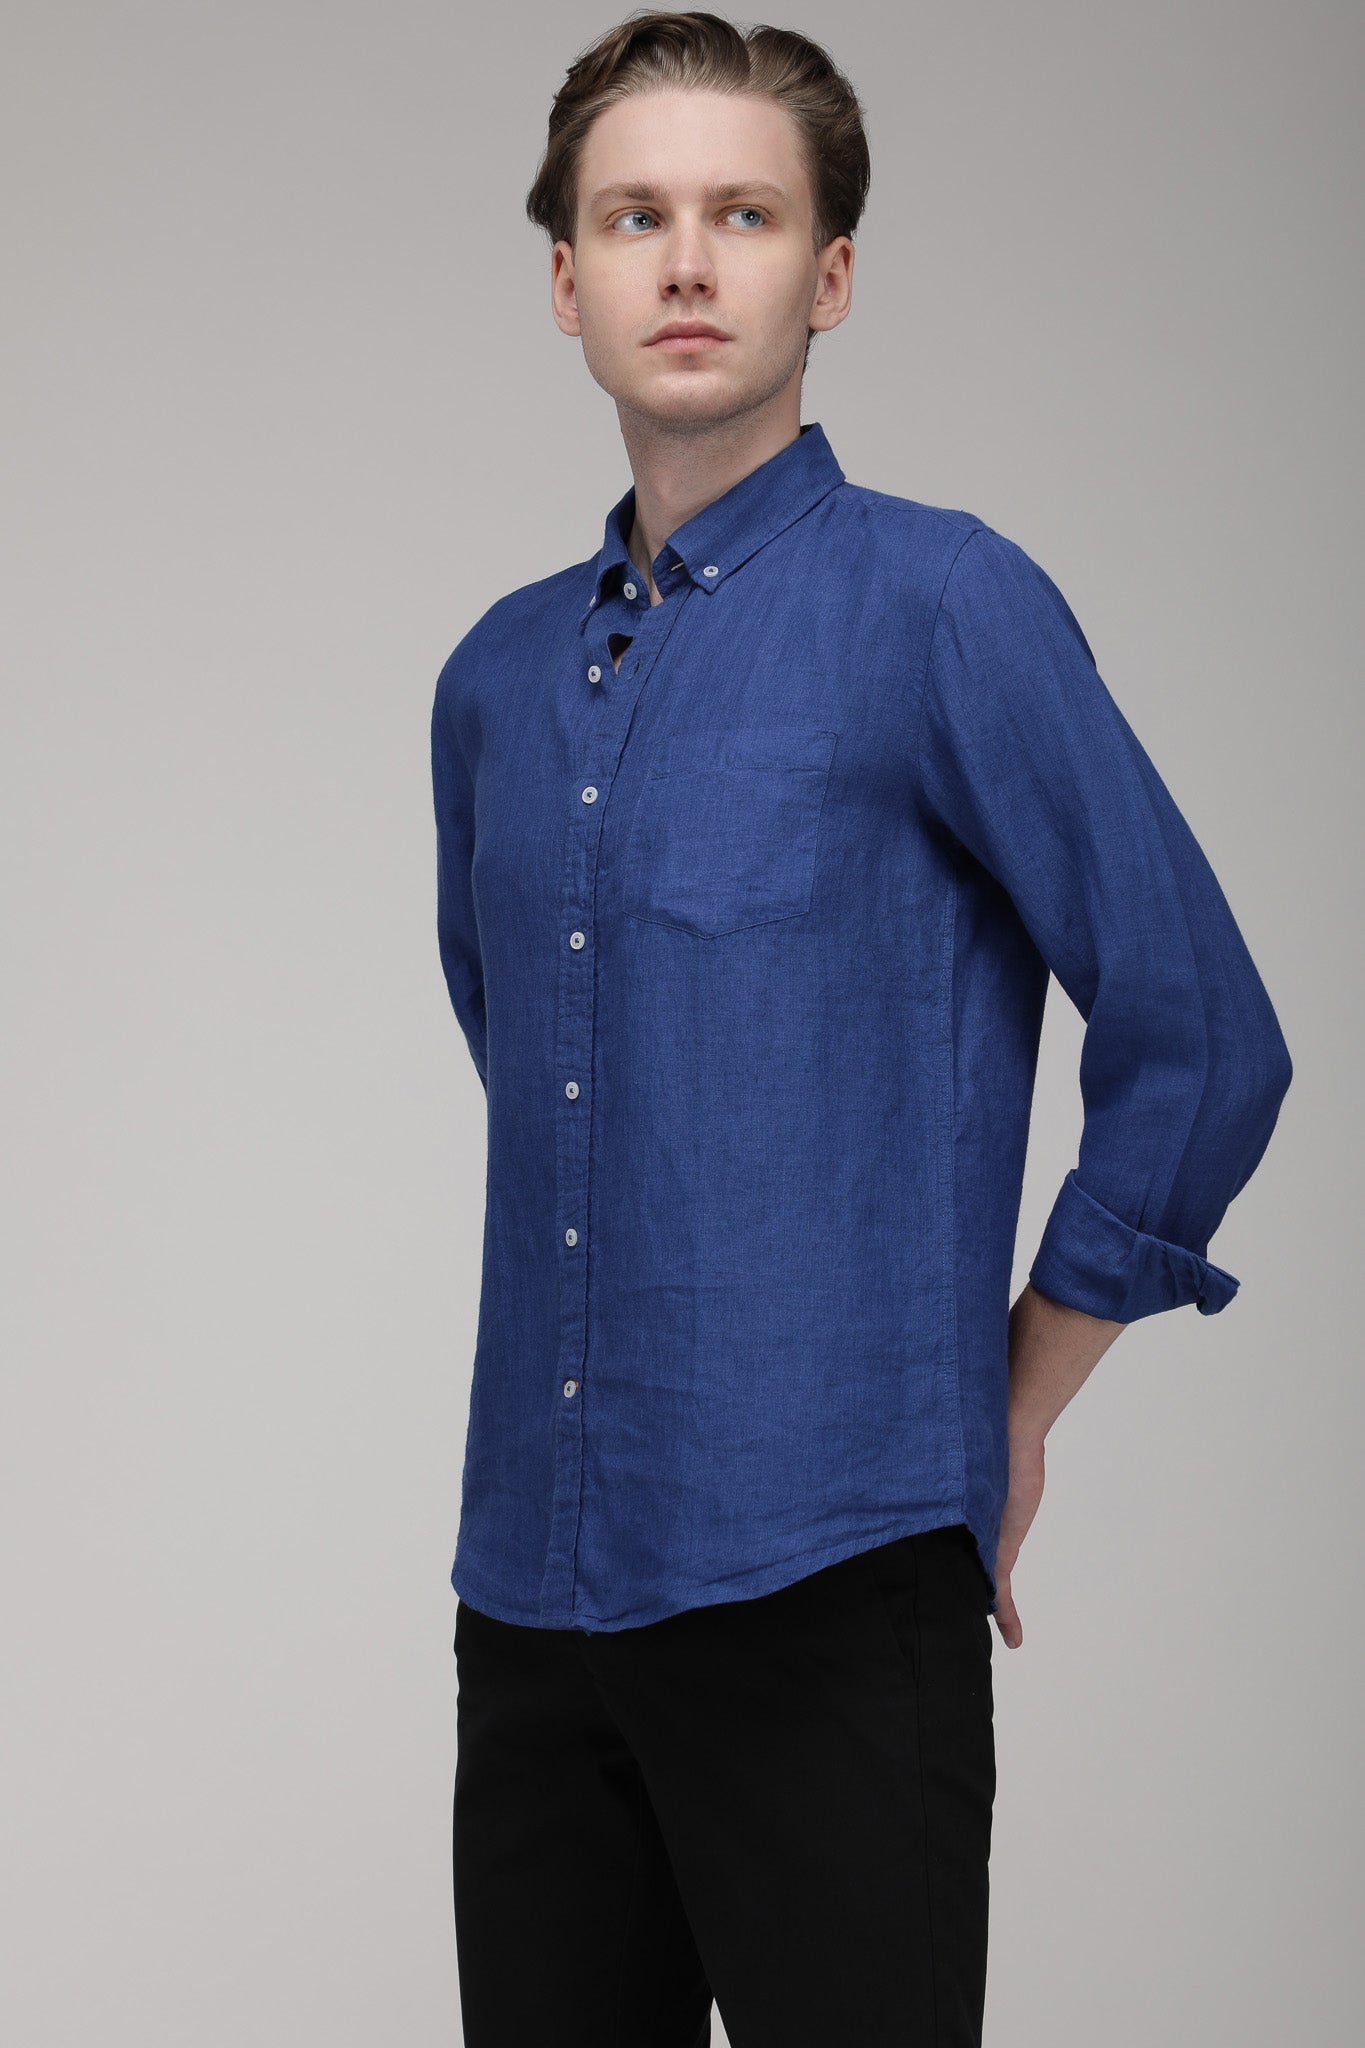 Bare Brown Linen Shirt, Slim Fit with Full Sleeves - Blue